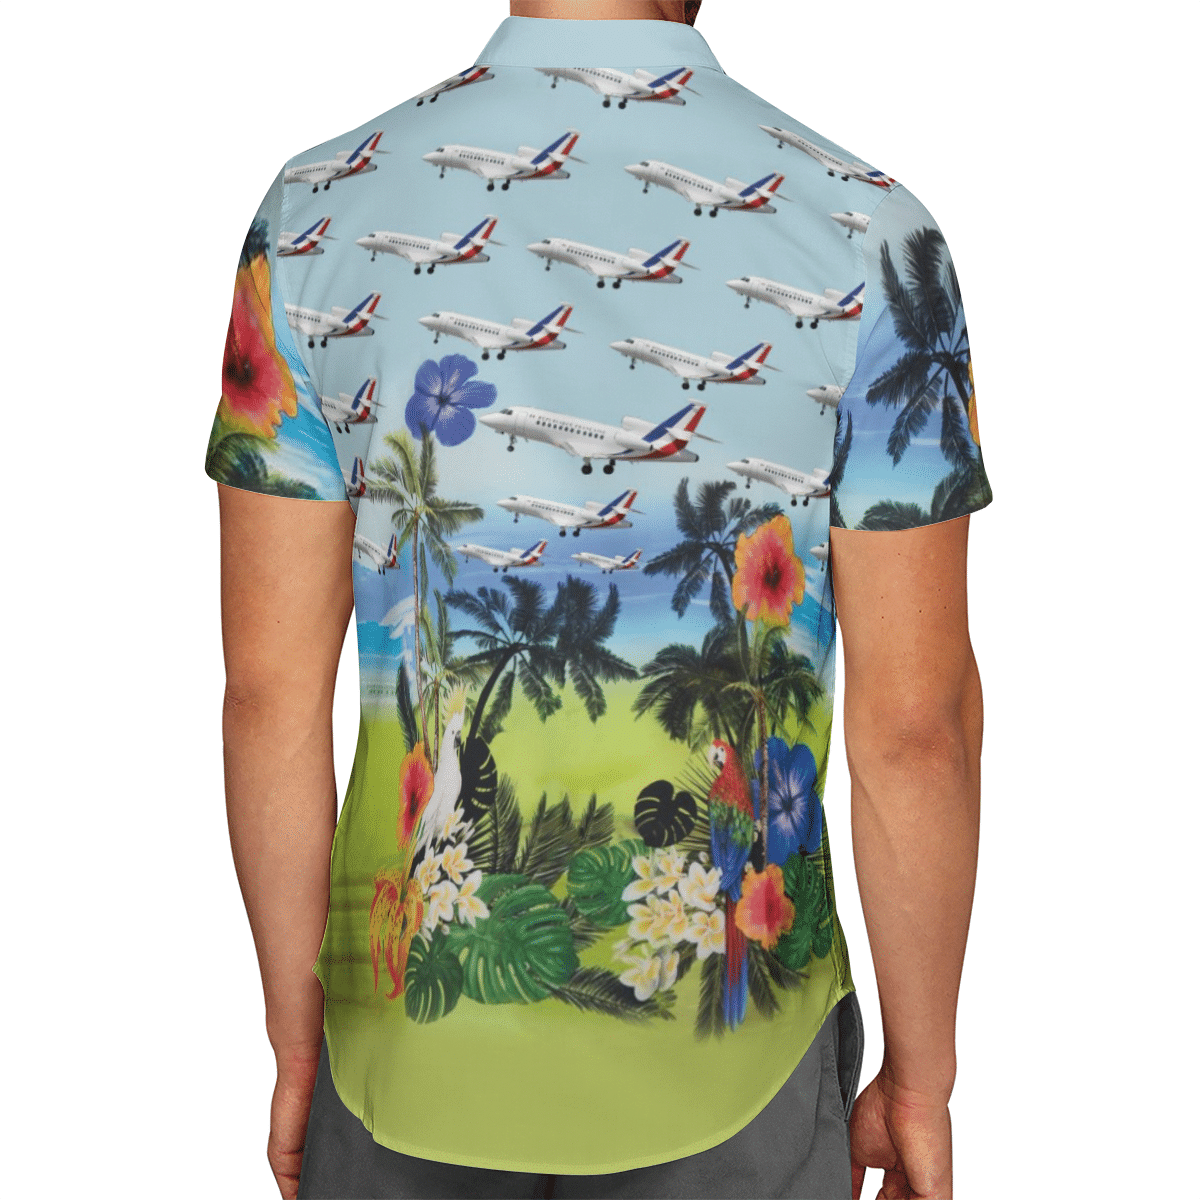 Going to the beach with a quality shirt 168